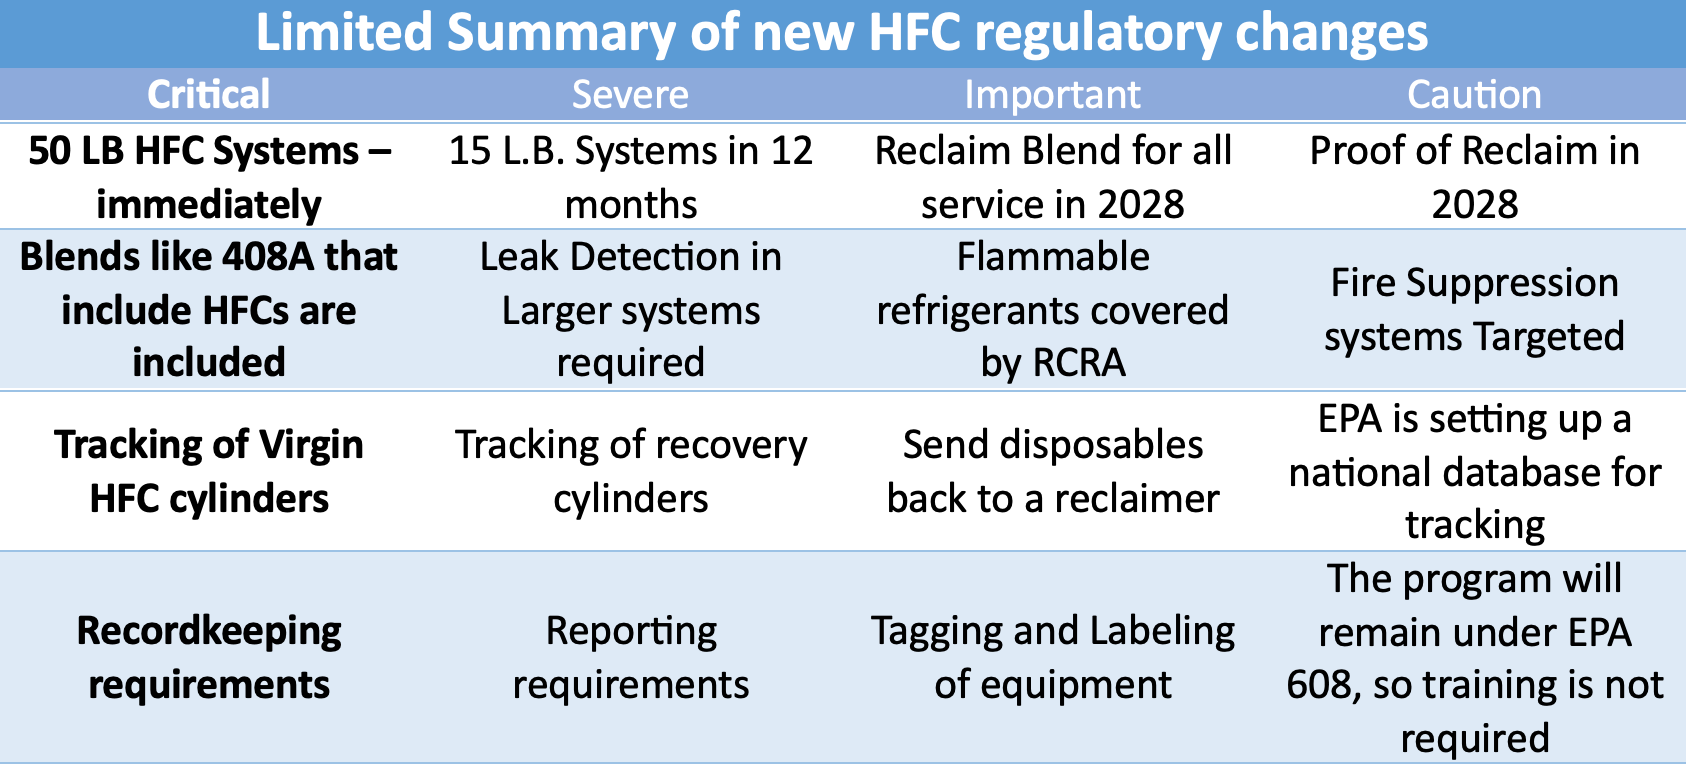 Limited Summary of new HFC regulatory changes